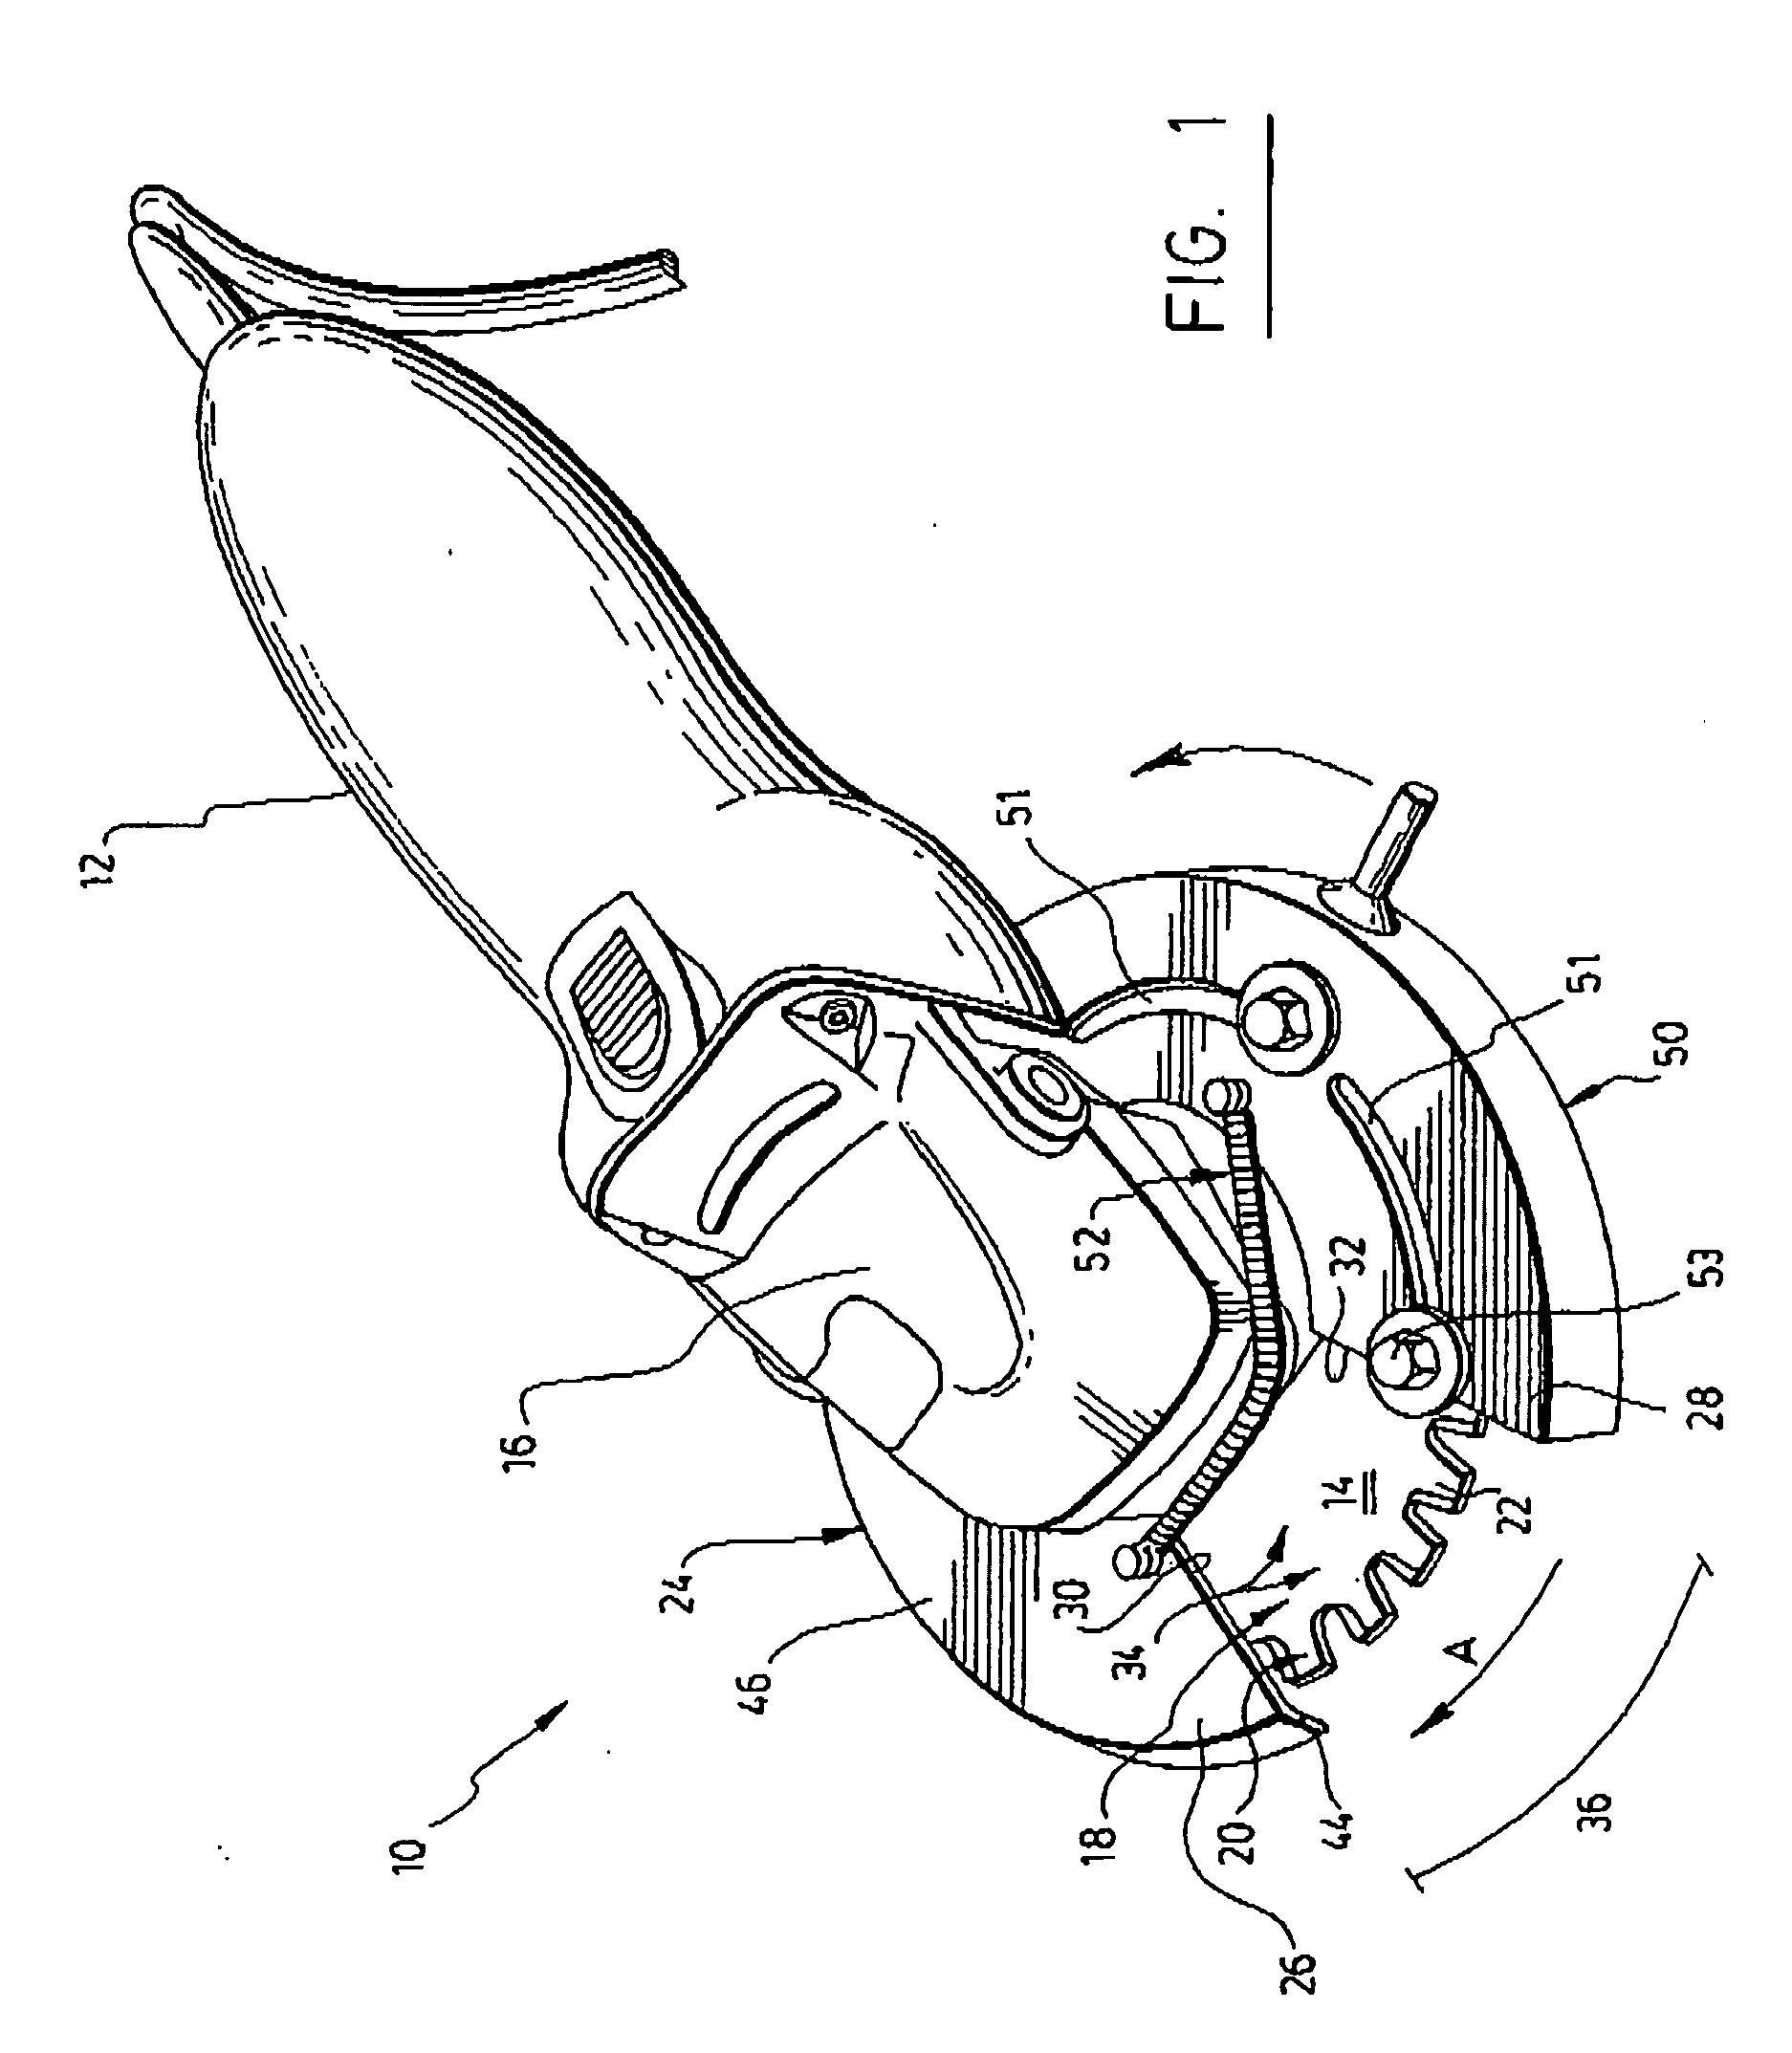 Portable cutting device with guiding guard